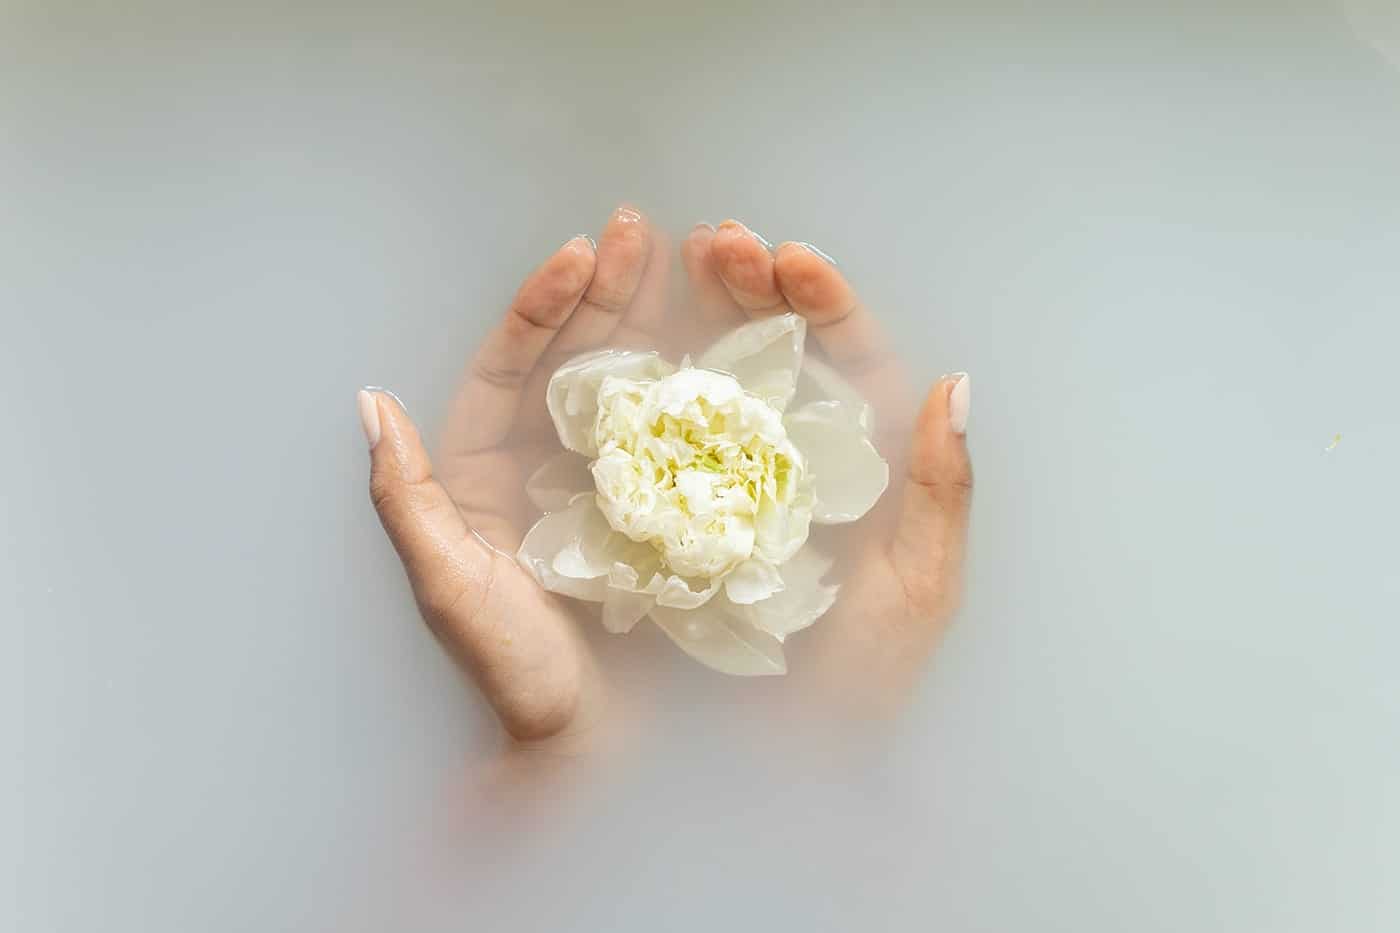 Hands holding lotus flower in milky or soapy water